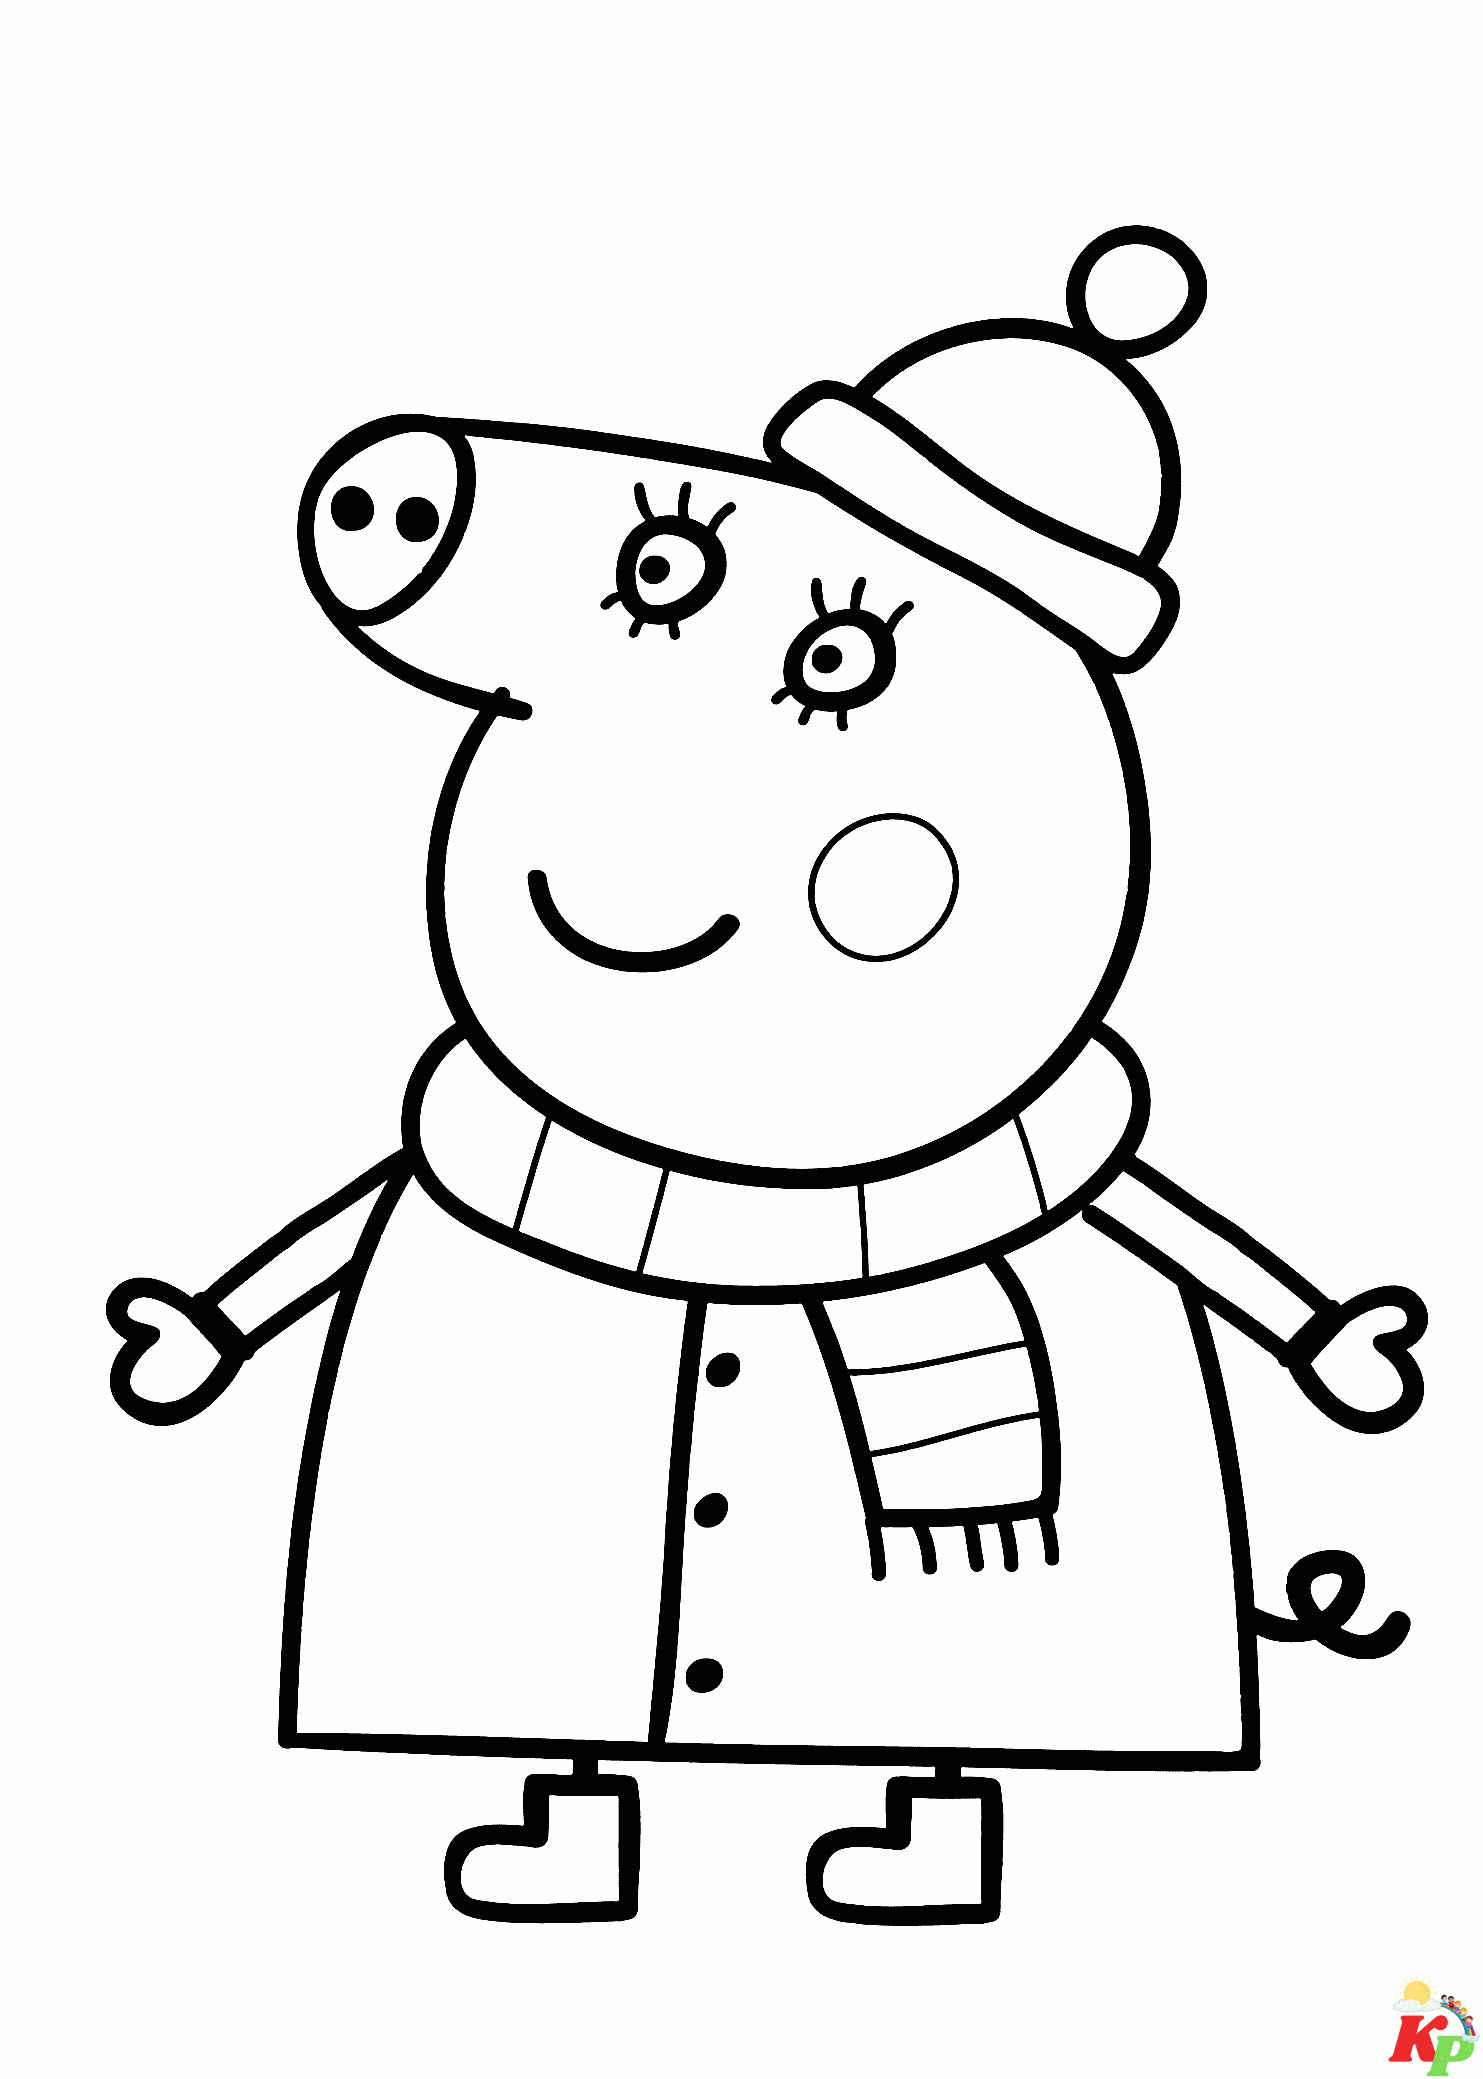 Peppa Pig Coloring Pages is free to download and can be downloaded at -  HedgeDoc